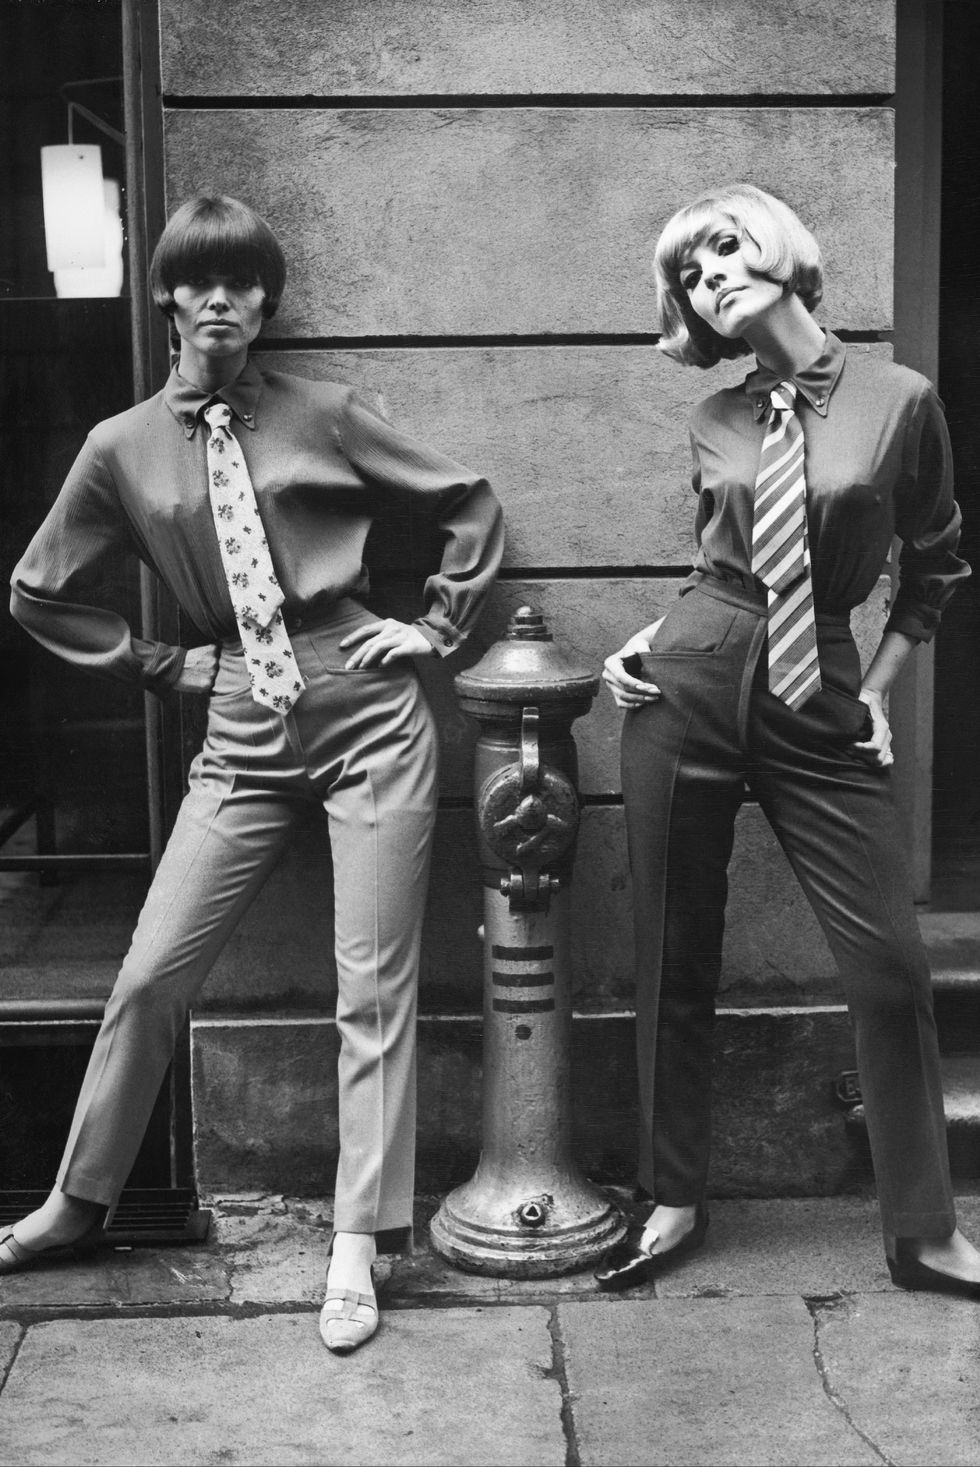 unisex fashion from the 1960's